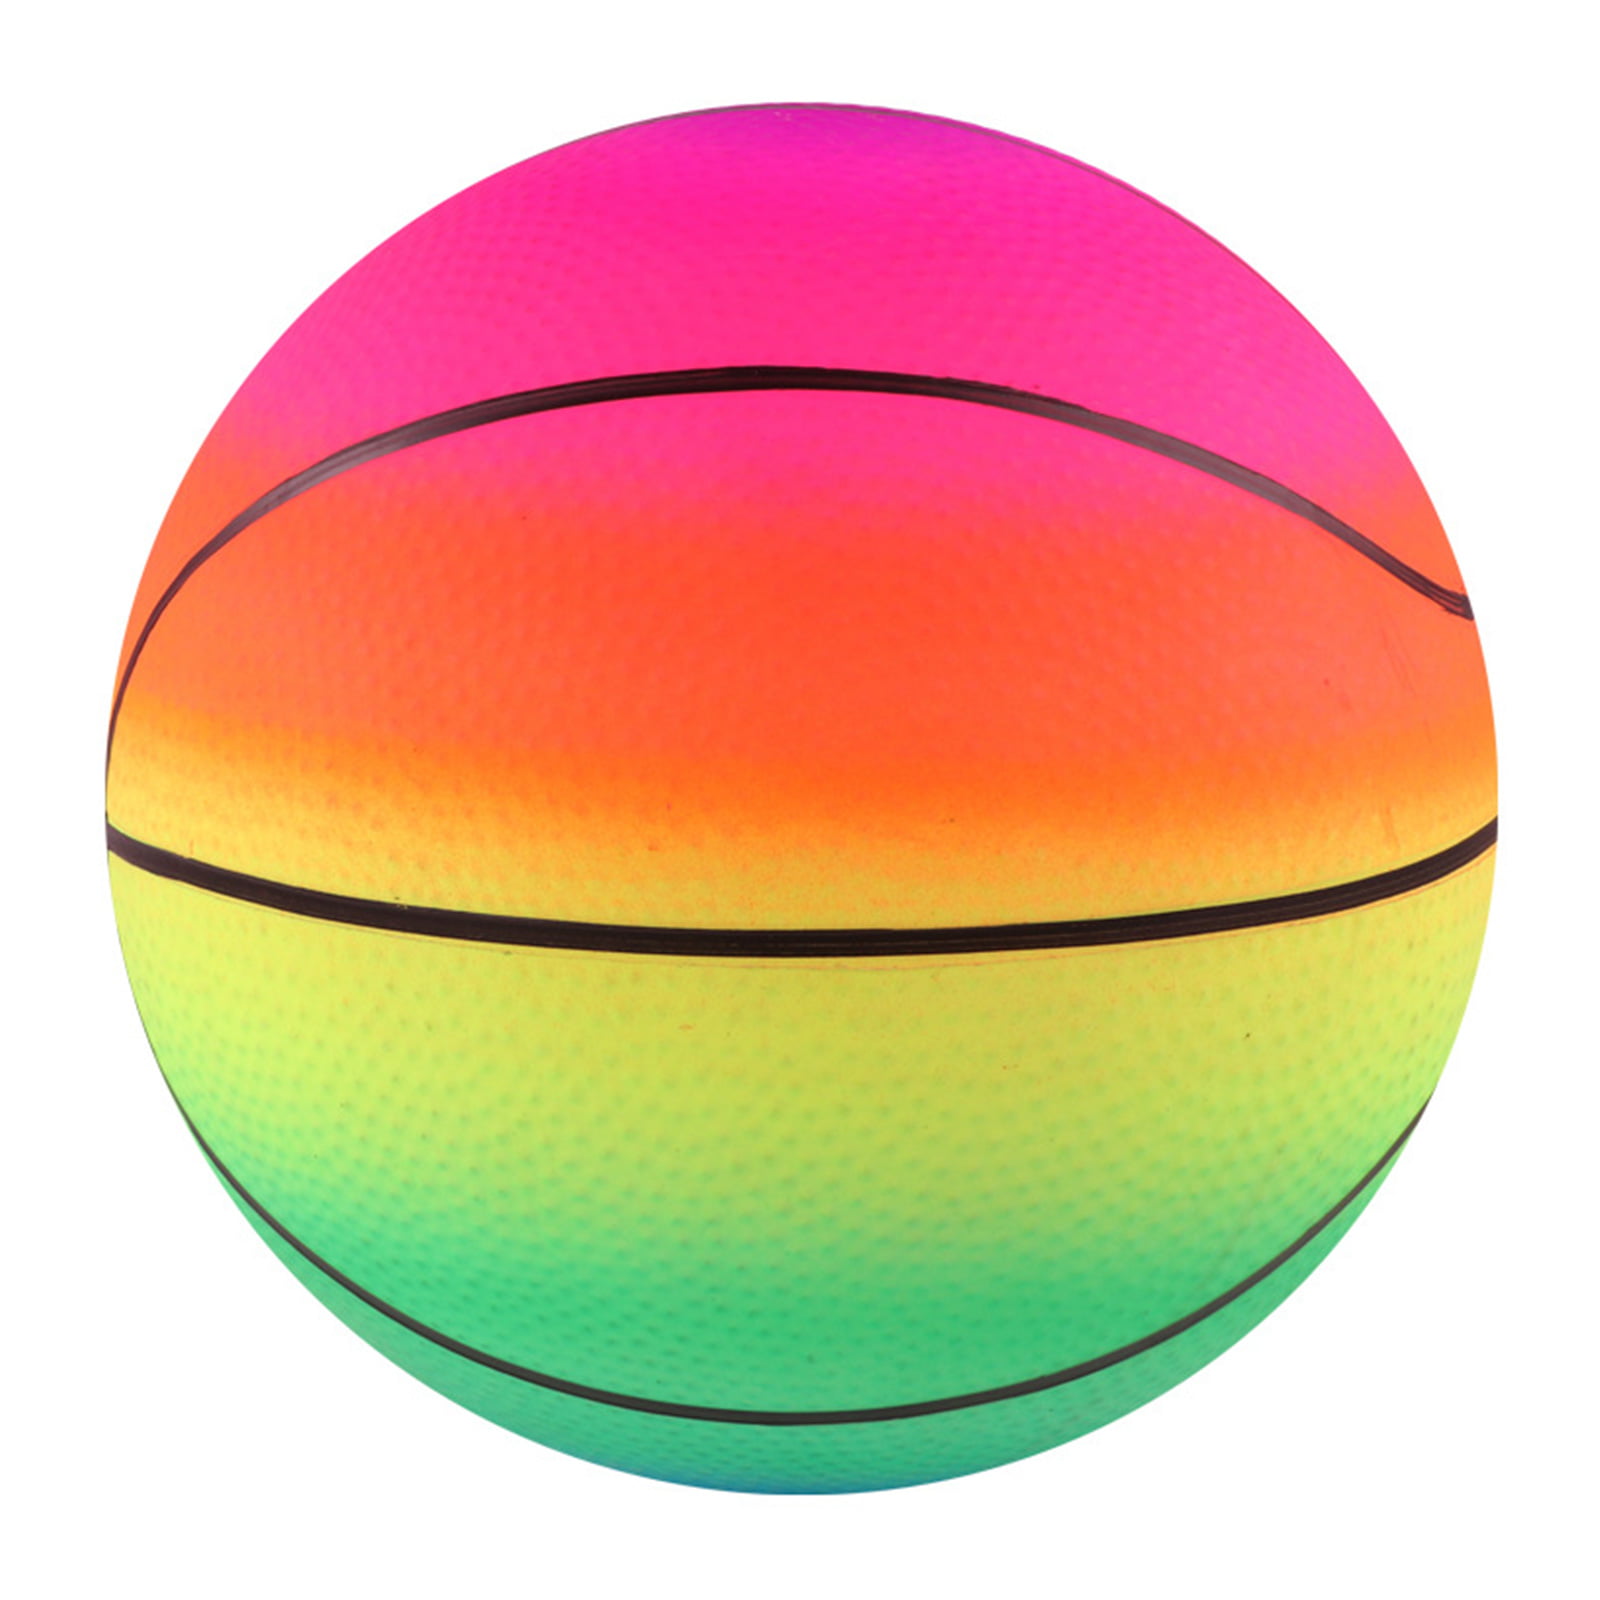 8.5'' Plastic Inflatable Basketball Beach Ball Kid Children Pool Beach Party Toy 